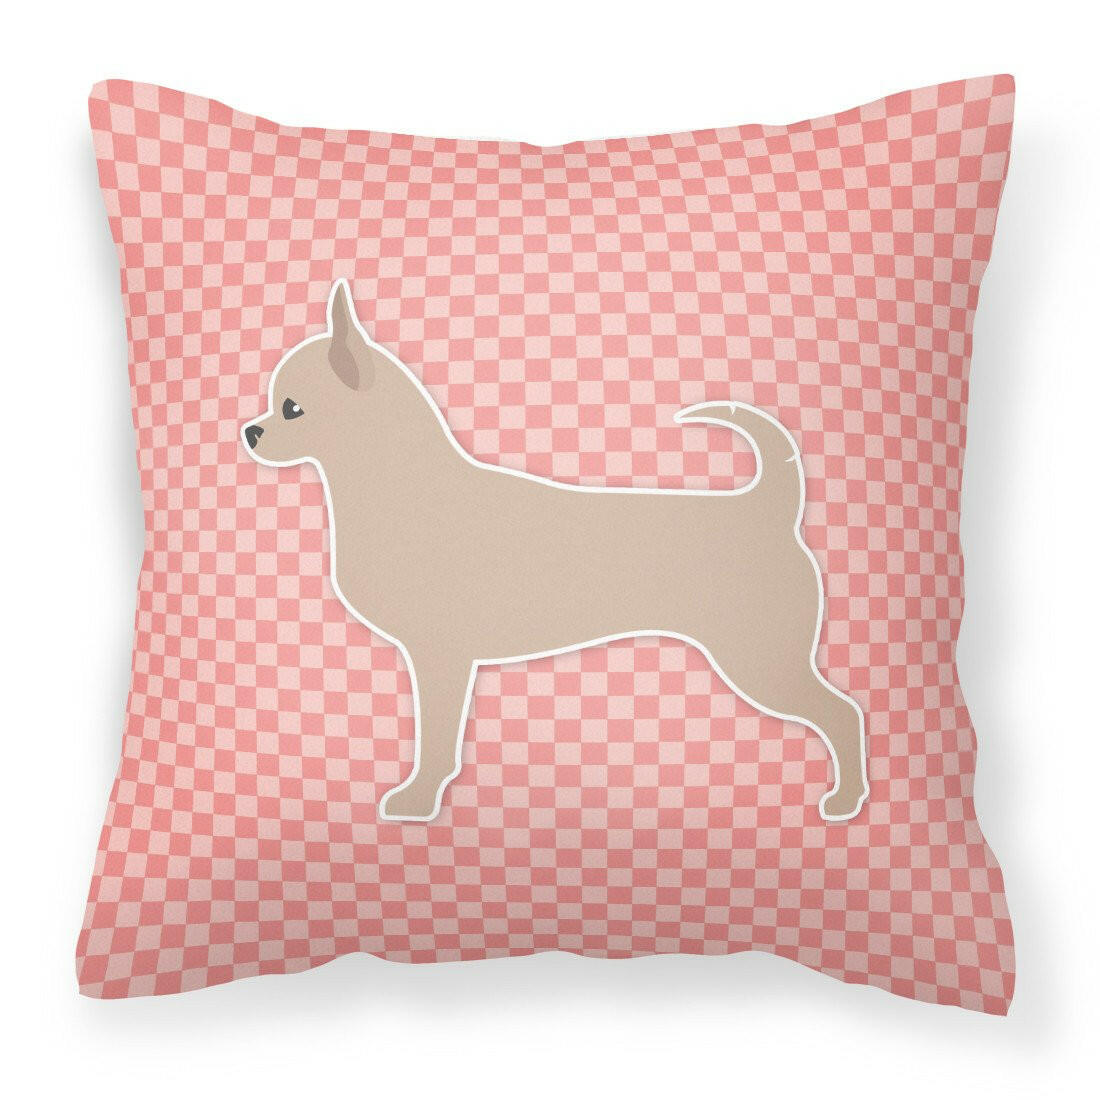 Chihuahua Checkerboard Pink Fabric Decorative Pillow BB3650PW1818 by Caroline's Treasures